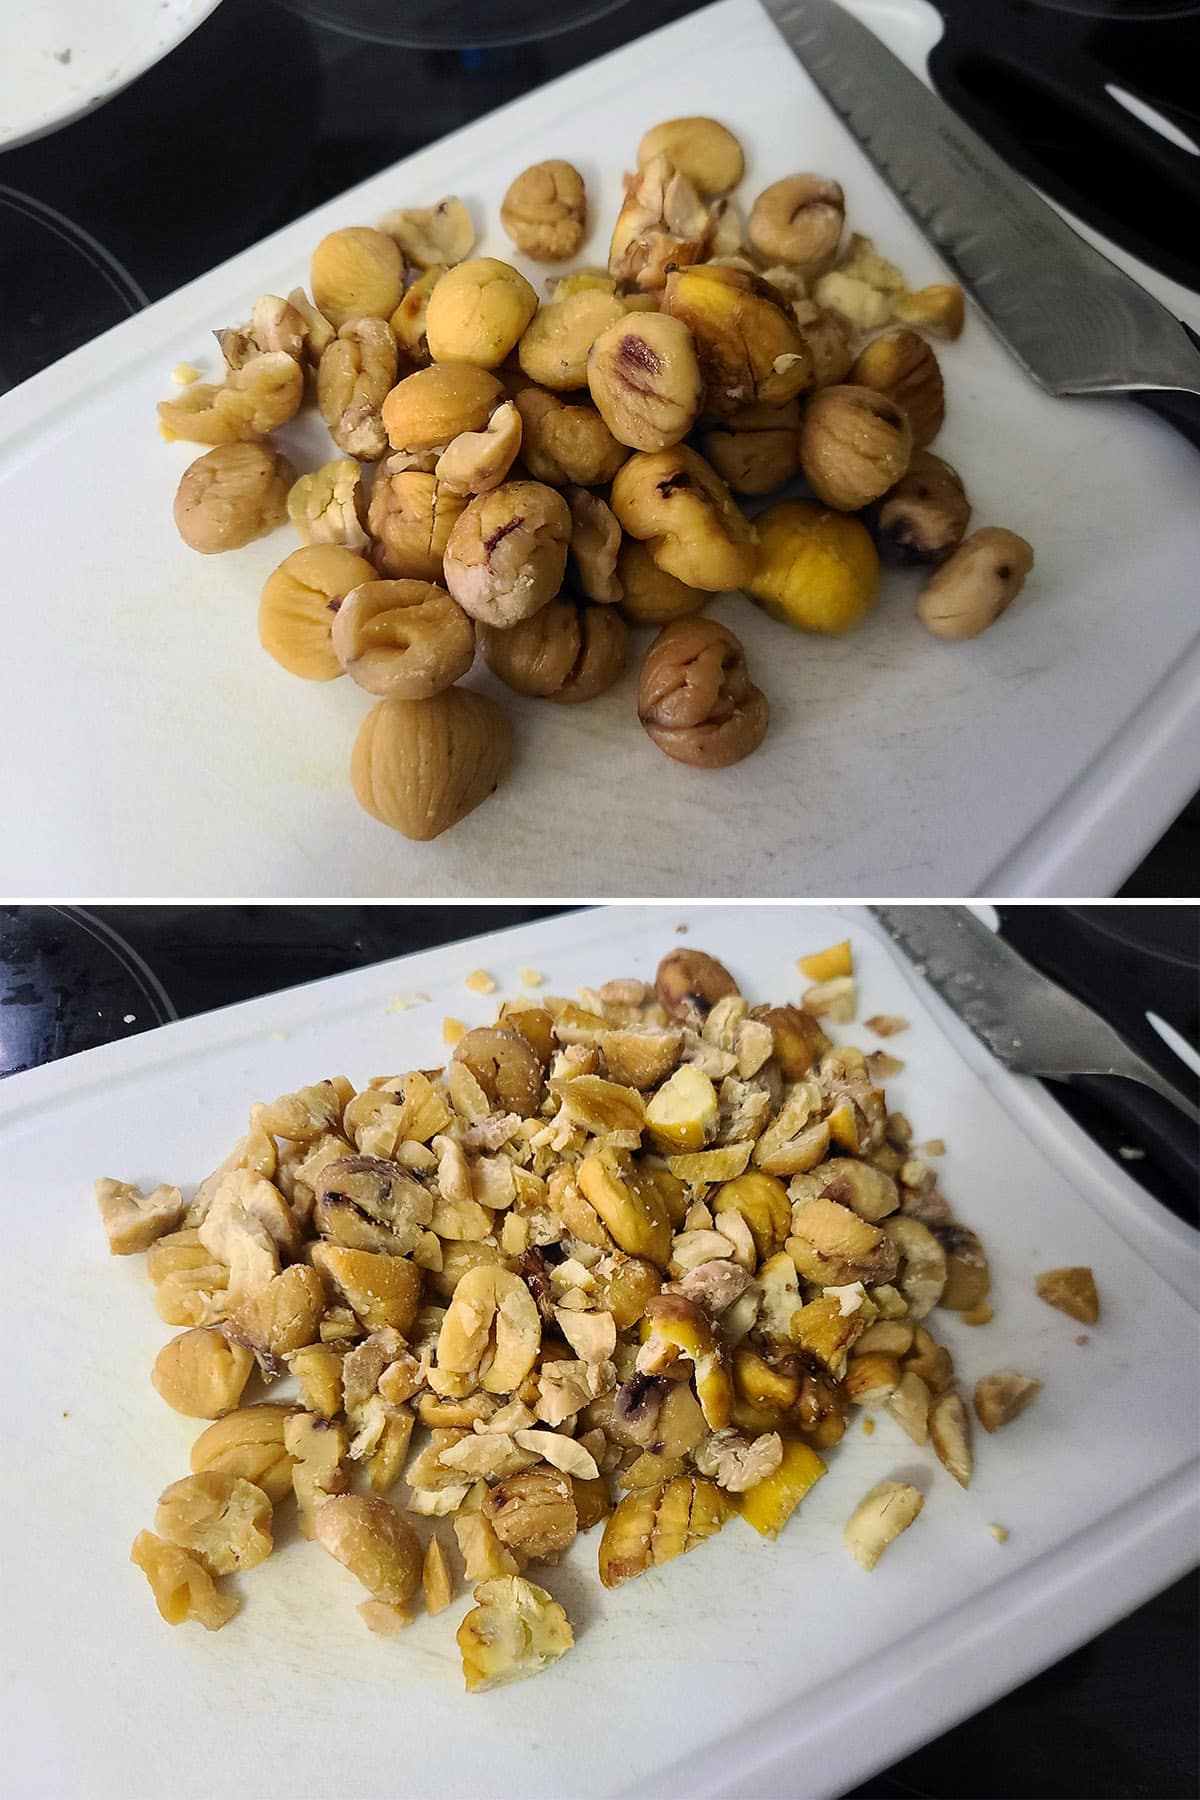 A 2 part image showing a pile of roasted chestnuts being chopped.